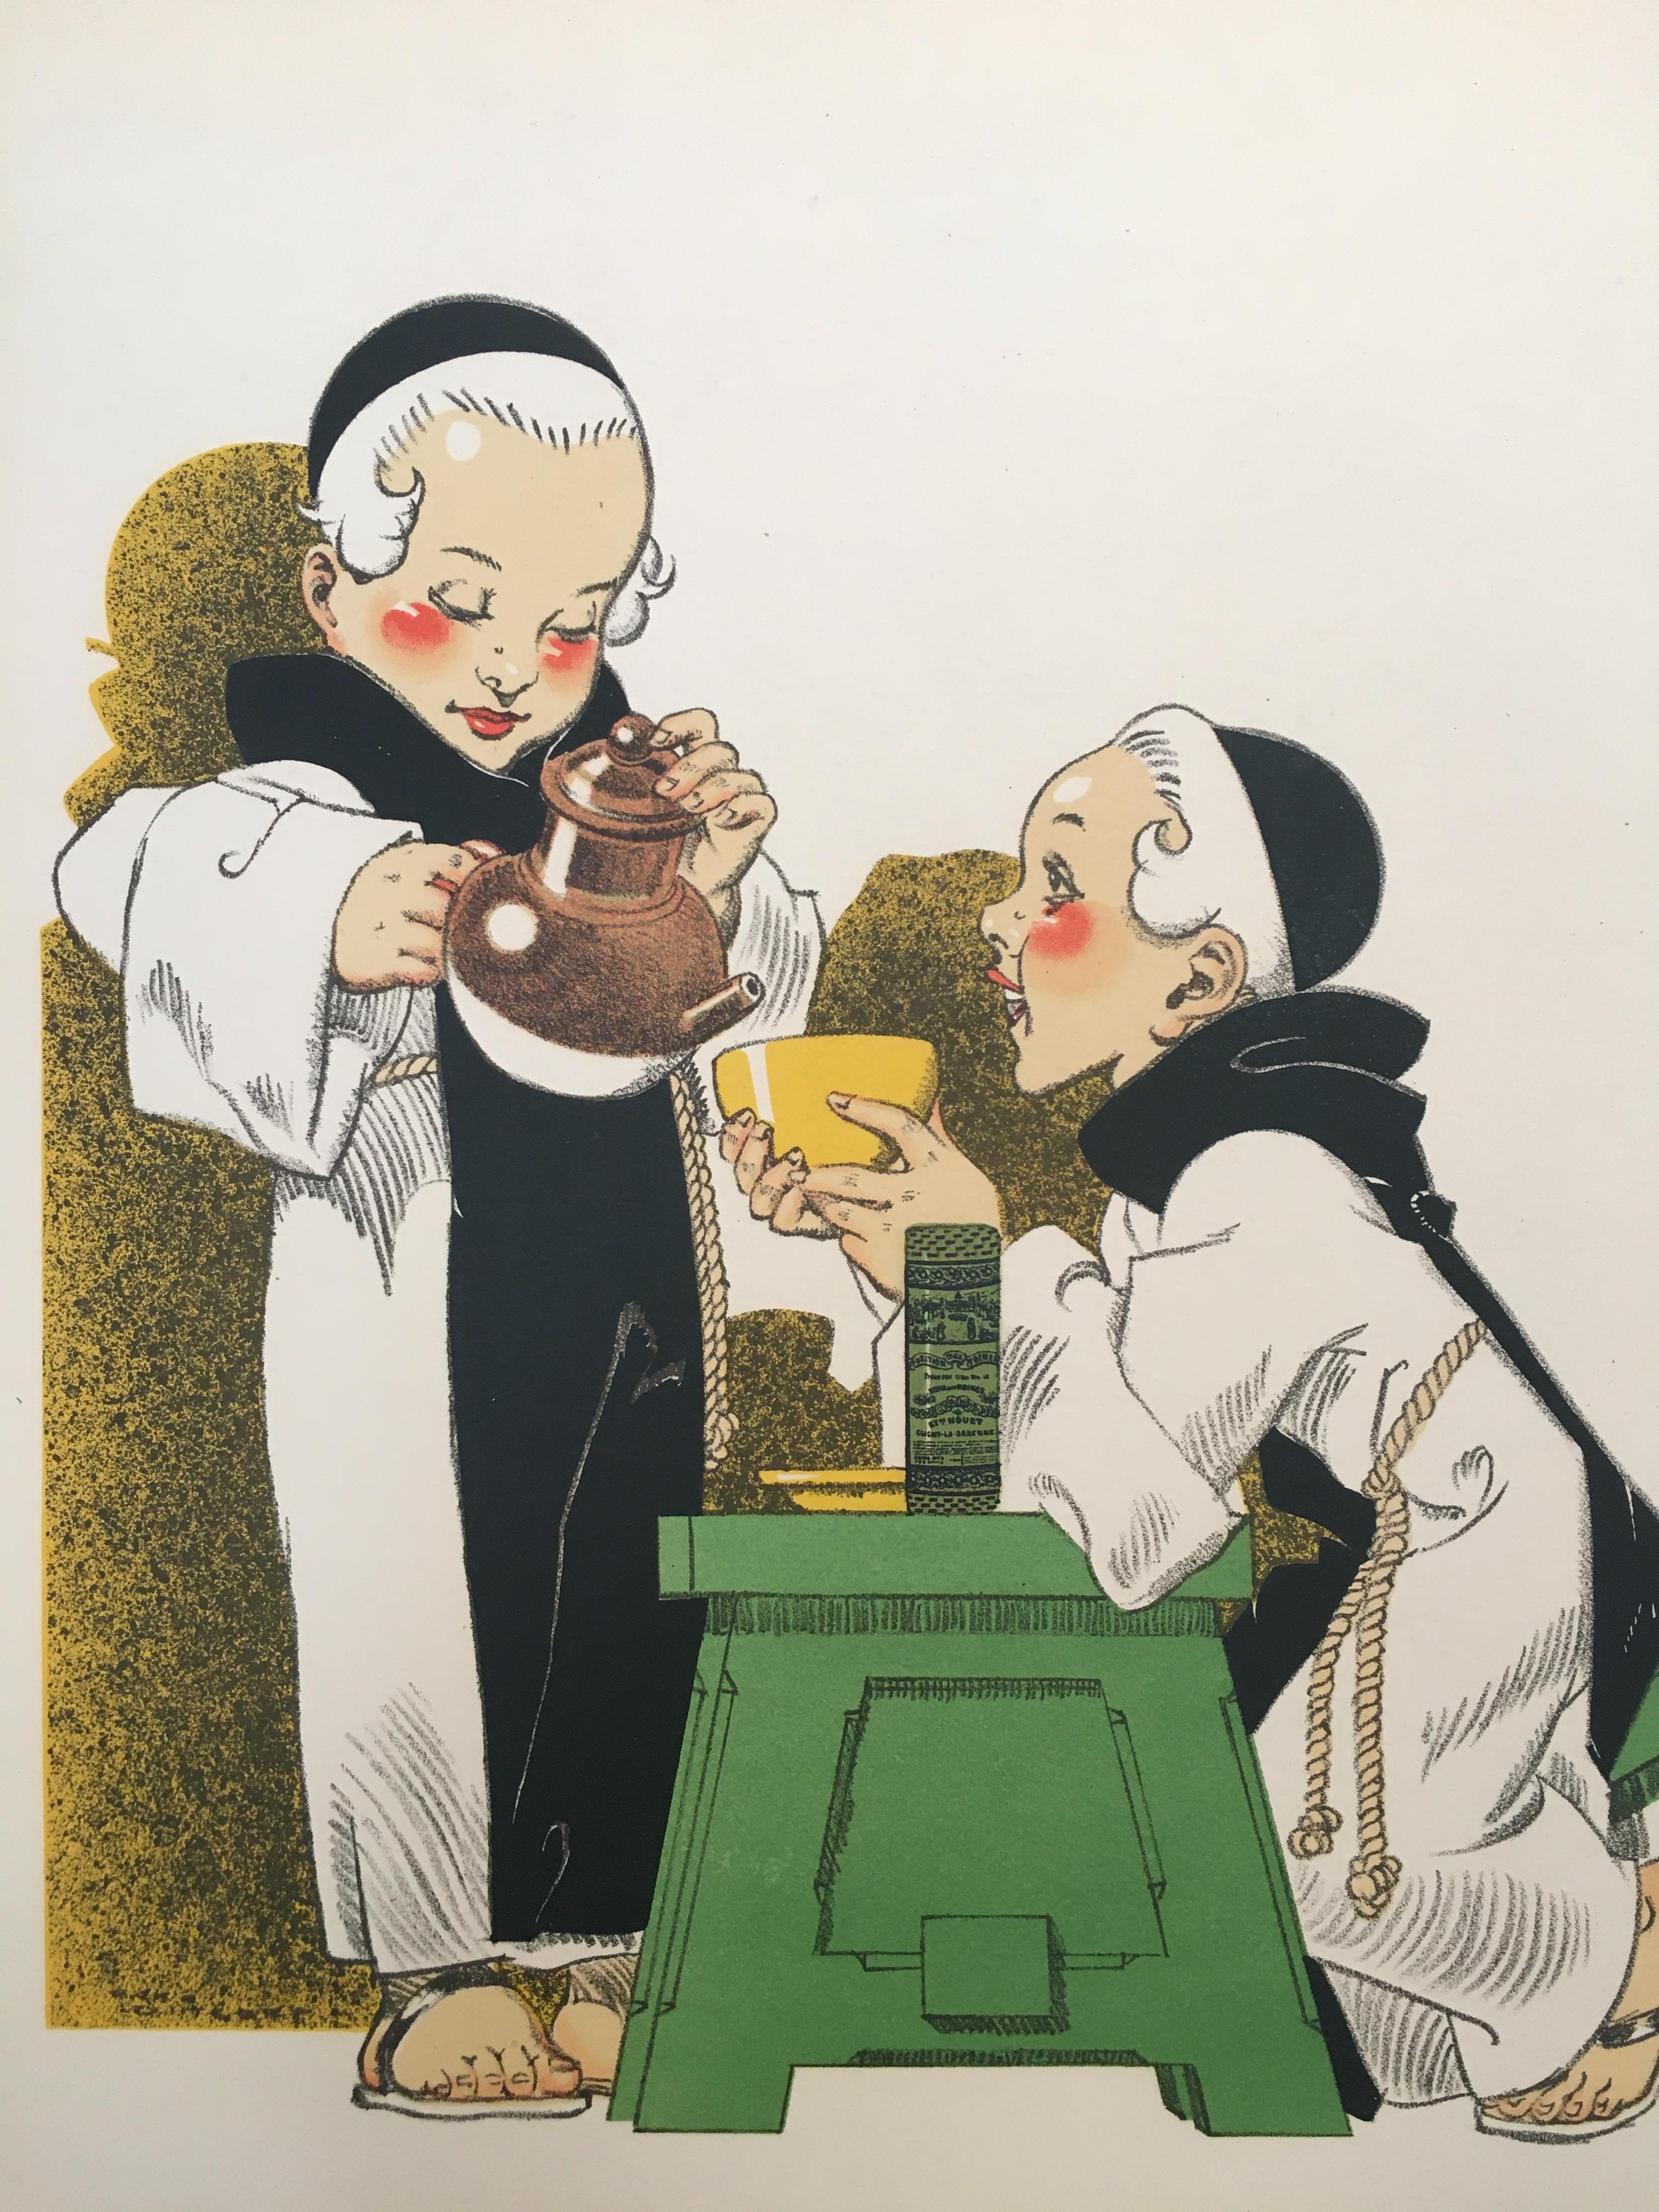 Original vintage French poster, 'Pas De Bon Cafe Sans Composition Des Moines' by Rene Vincent
 
A delightful poster, an illustration by Rene Vincent depicting the joy of two young monks, sharing a moment over a cup of warm coffee. Its artist, René